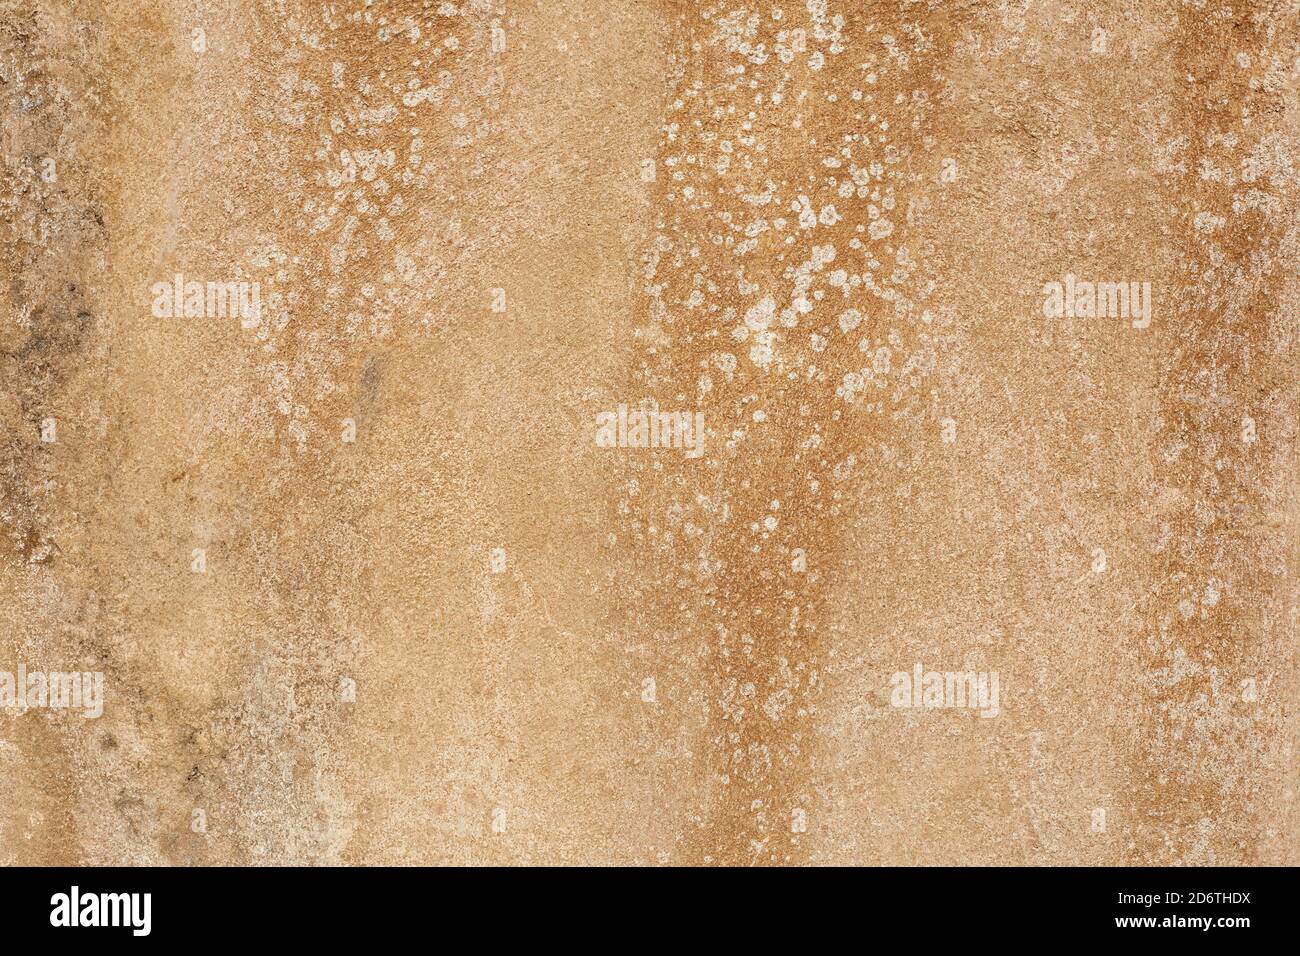 Brown stone, rough surface, texture background Stock Photo